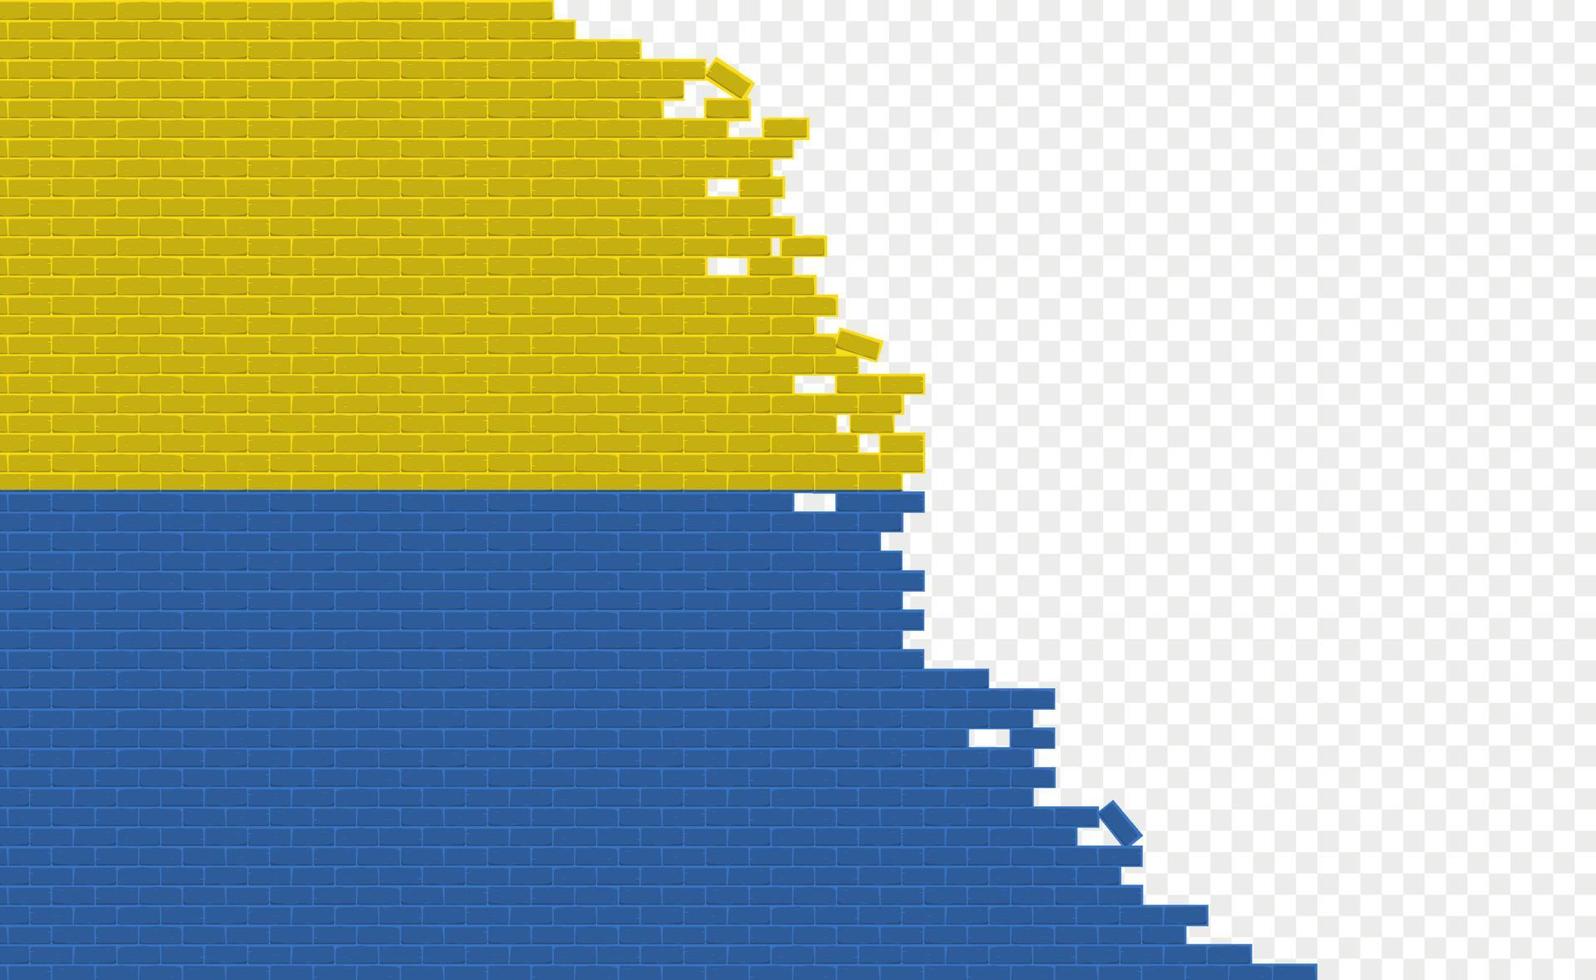 Ukraine flag on broken brick wall. Empty flag field of another country. Country comparison. Easy editing and vector in groups.